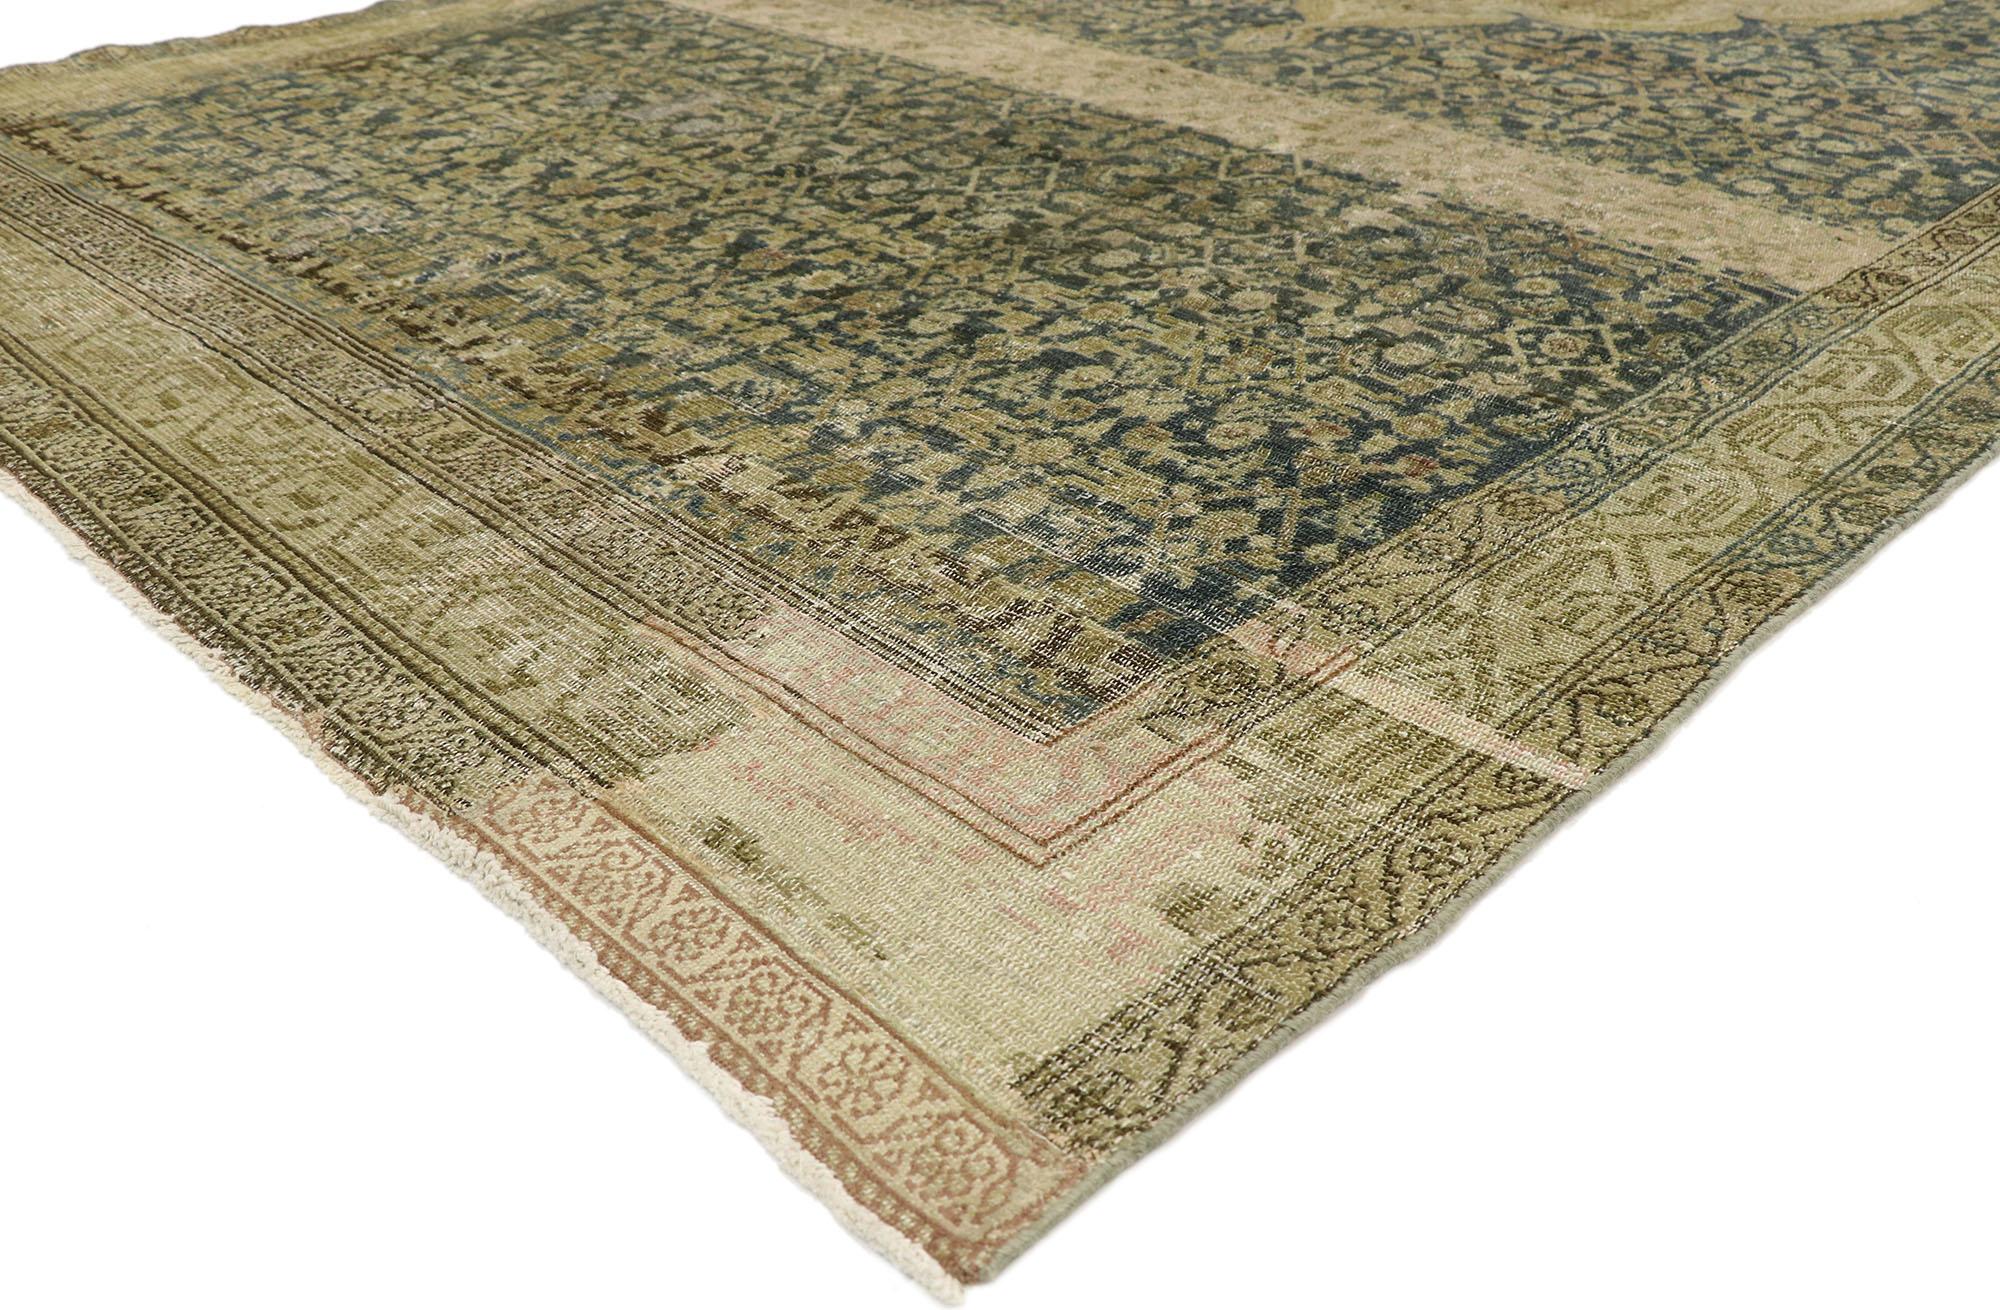 51881 Distressed Antique Persian Malayer gallery rug with modern rustic style 06'10 x 15'04. With its time-softened colors and rugged beauty, this hand-knotted wool distressed antique Persian Malayer gallery rug is a captivating vision of woven